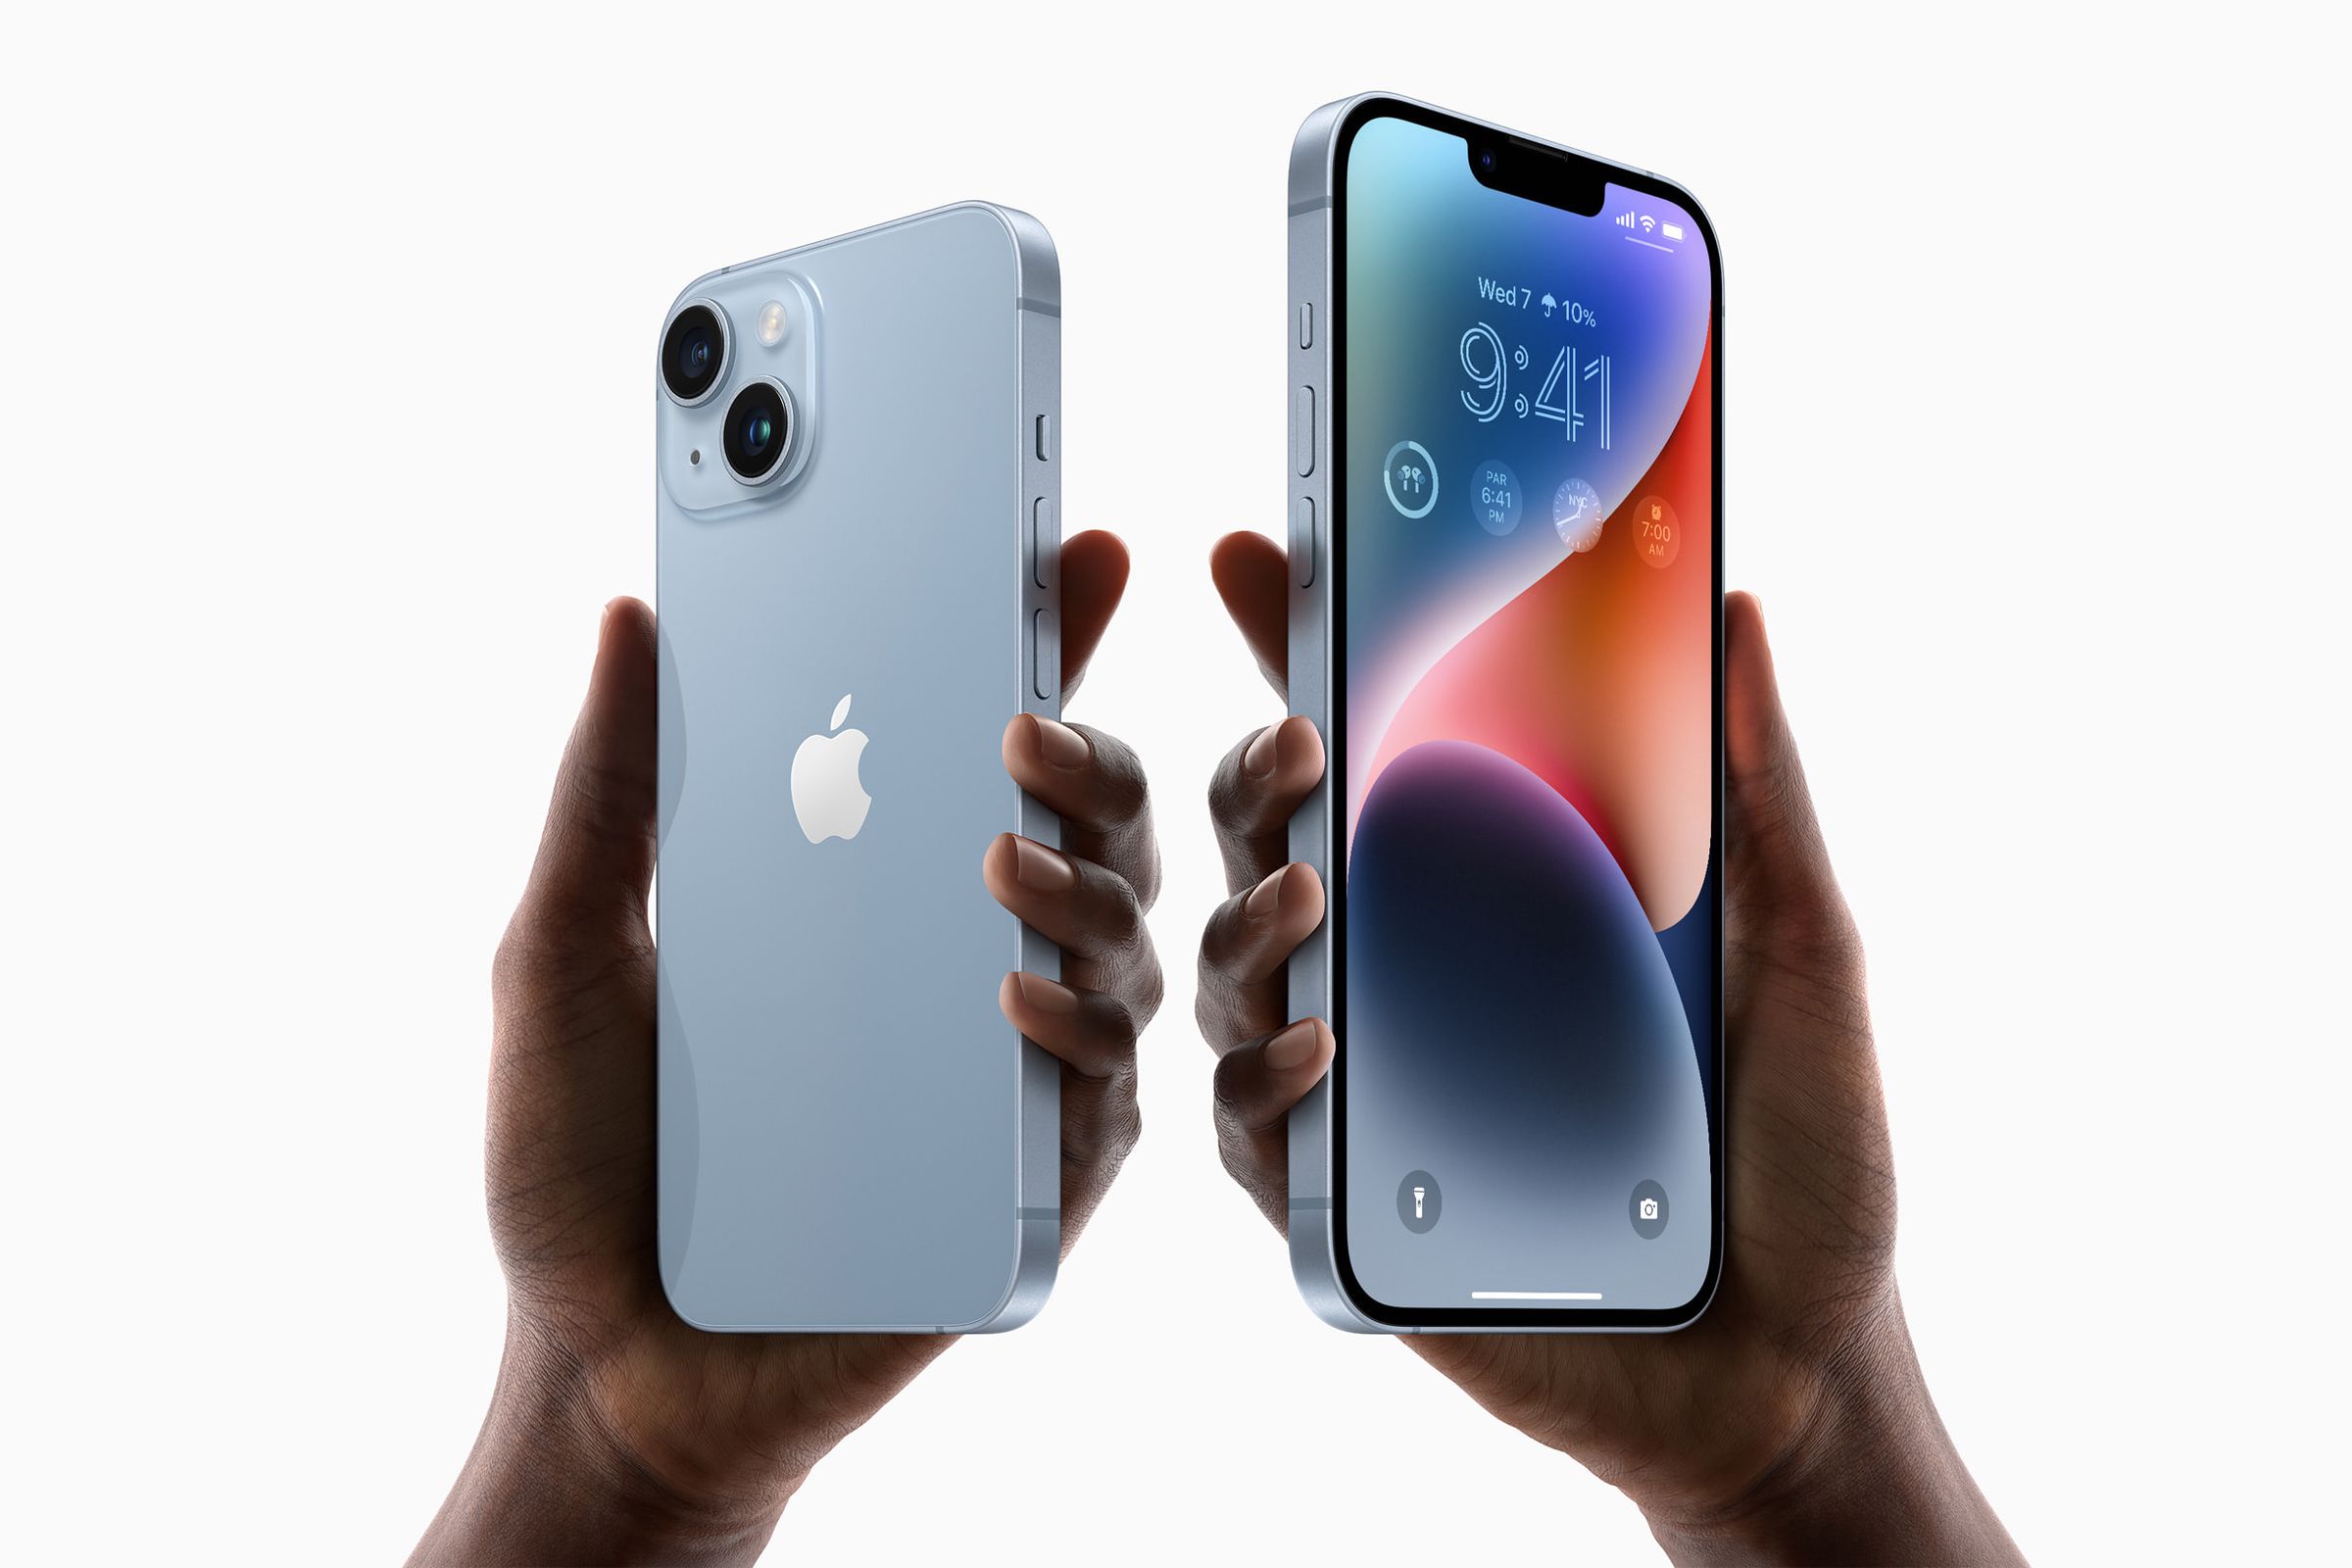 Image of the iPhone 14 and the iPhone 14 Plus, both in a light shade of blue.